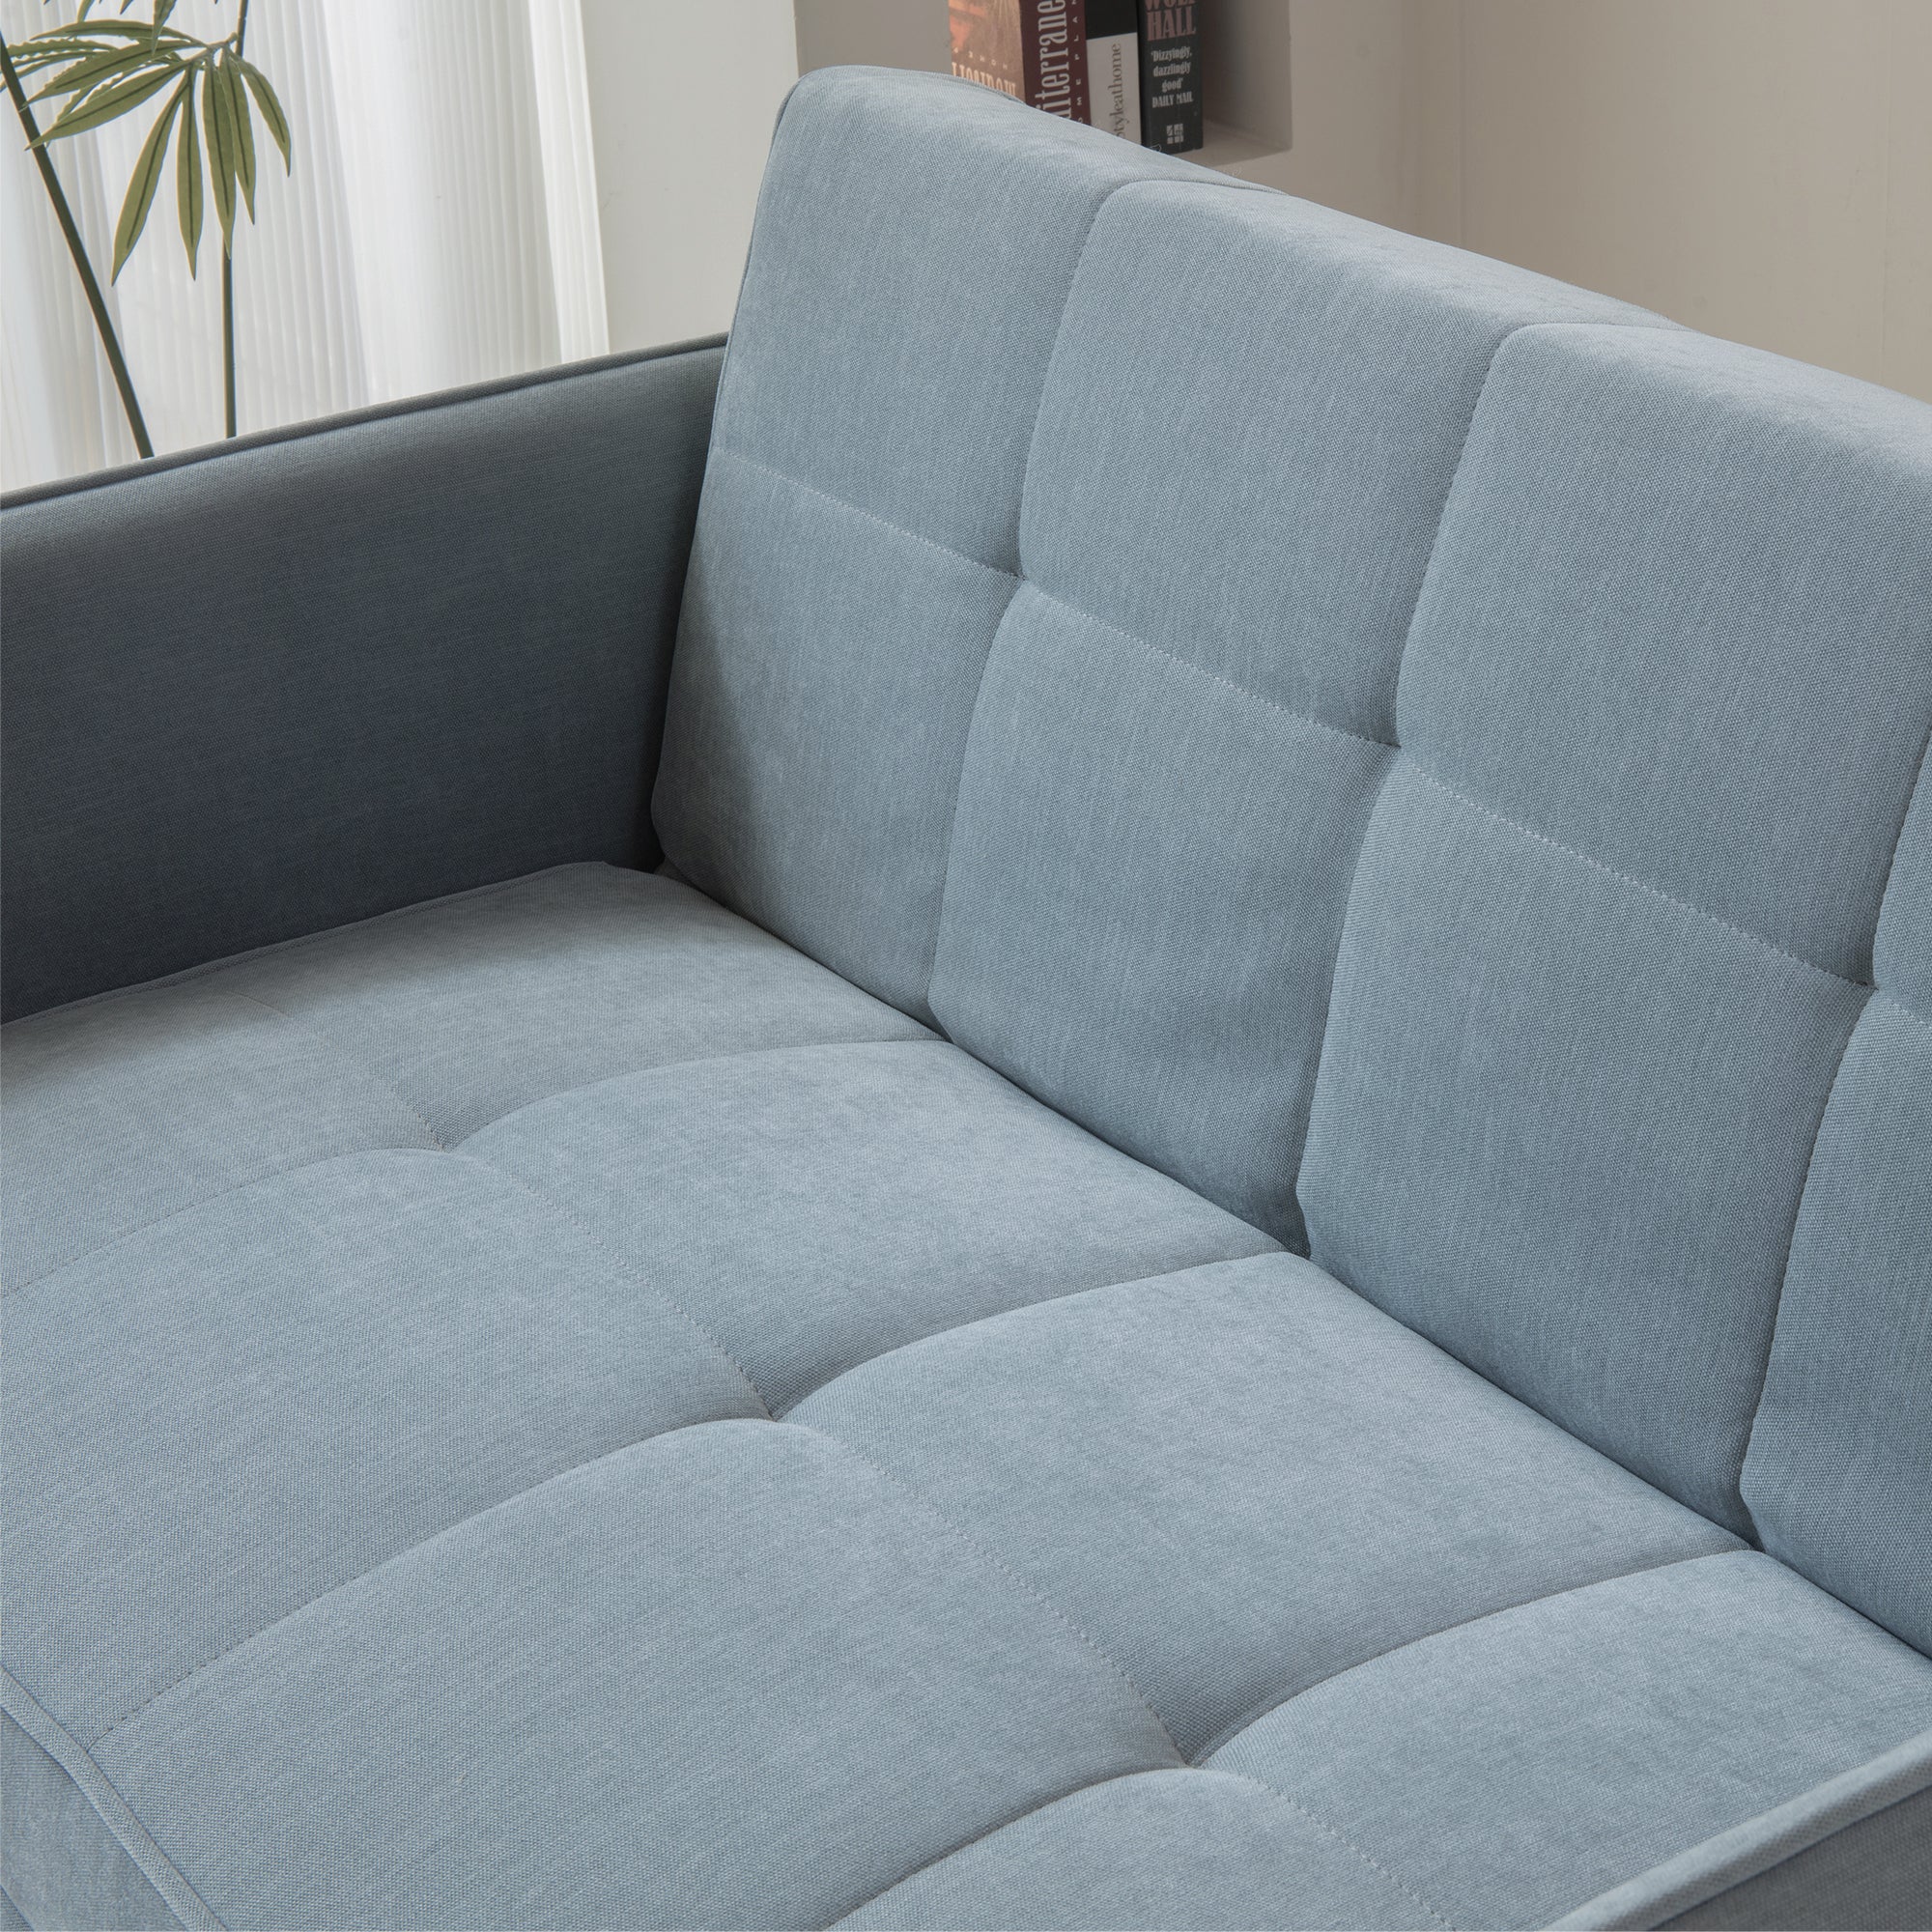 Chenille fabric pull-out sofa bed,sleeper loveseat couch with adjustable armrests-Grey